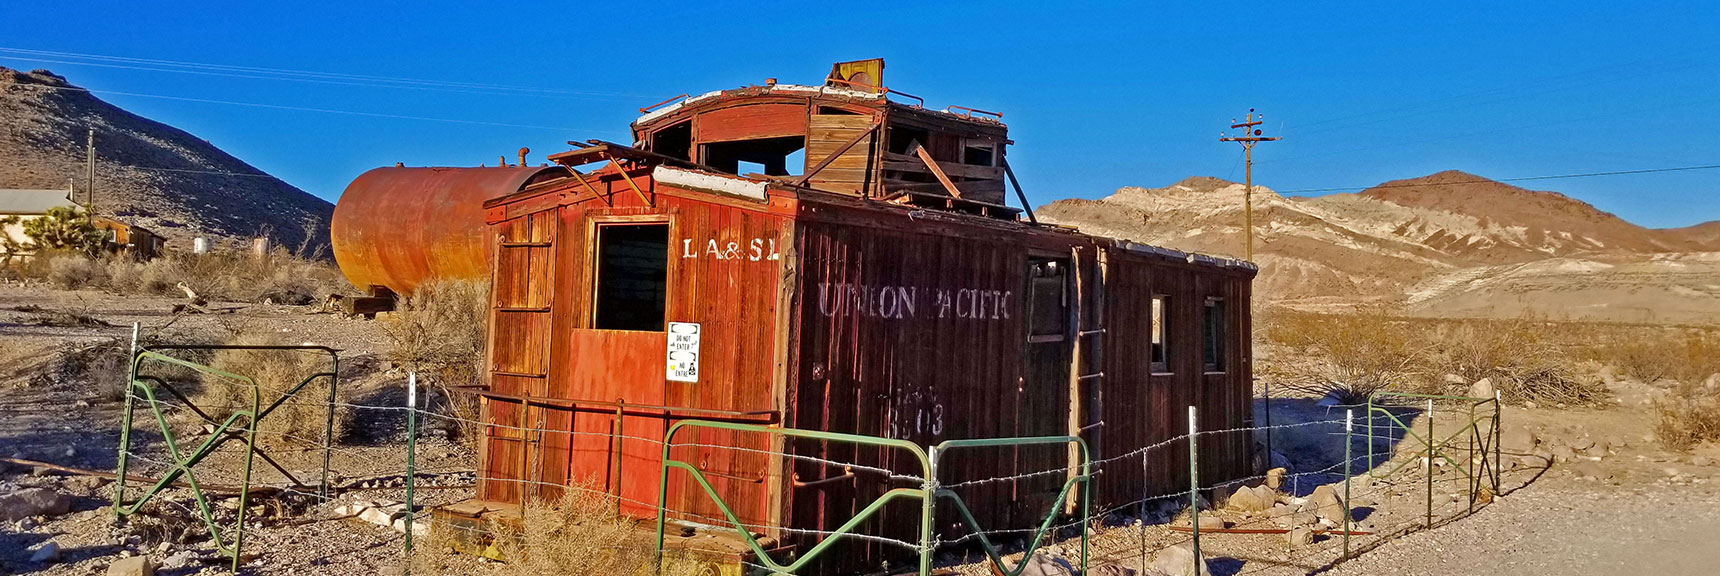 Caboose House at Train Depot - Recently a Gas Station | Rhyolite Ghost Town | Death Valley Area, Nevada